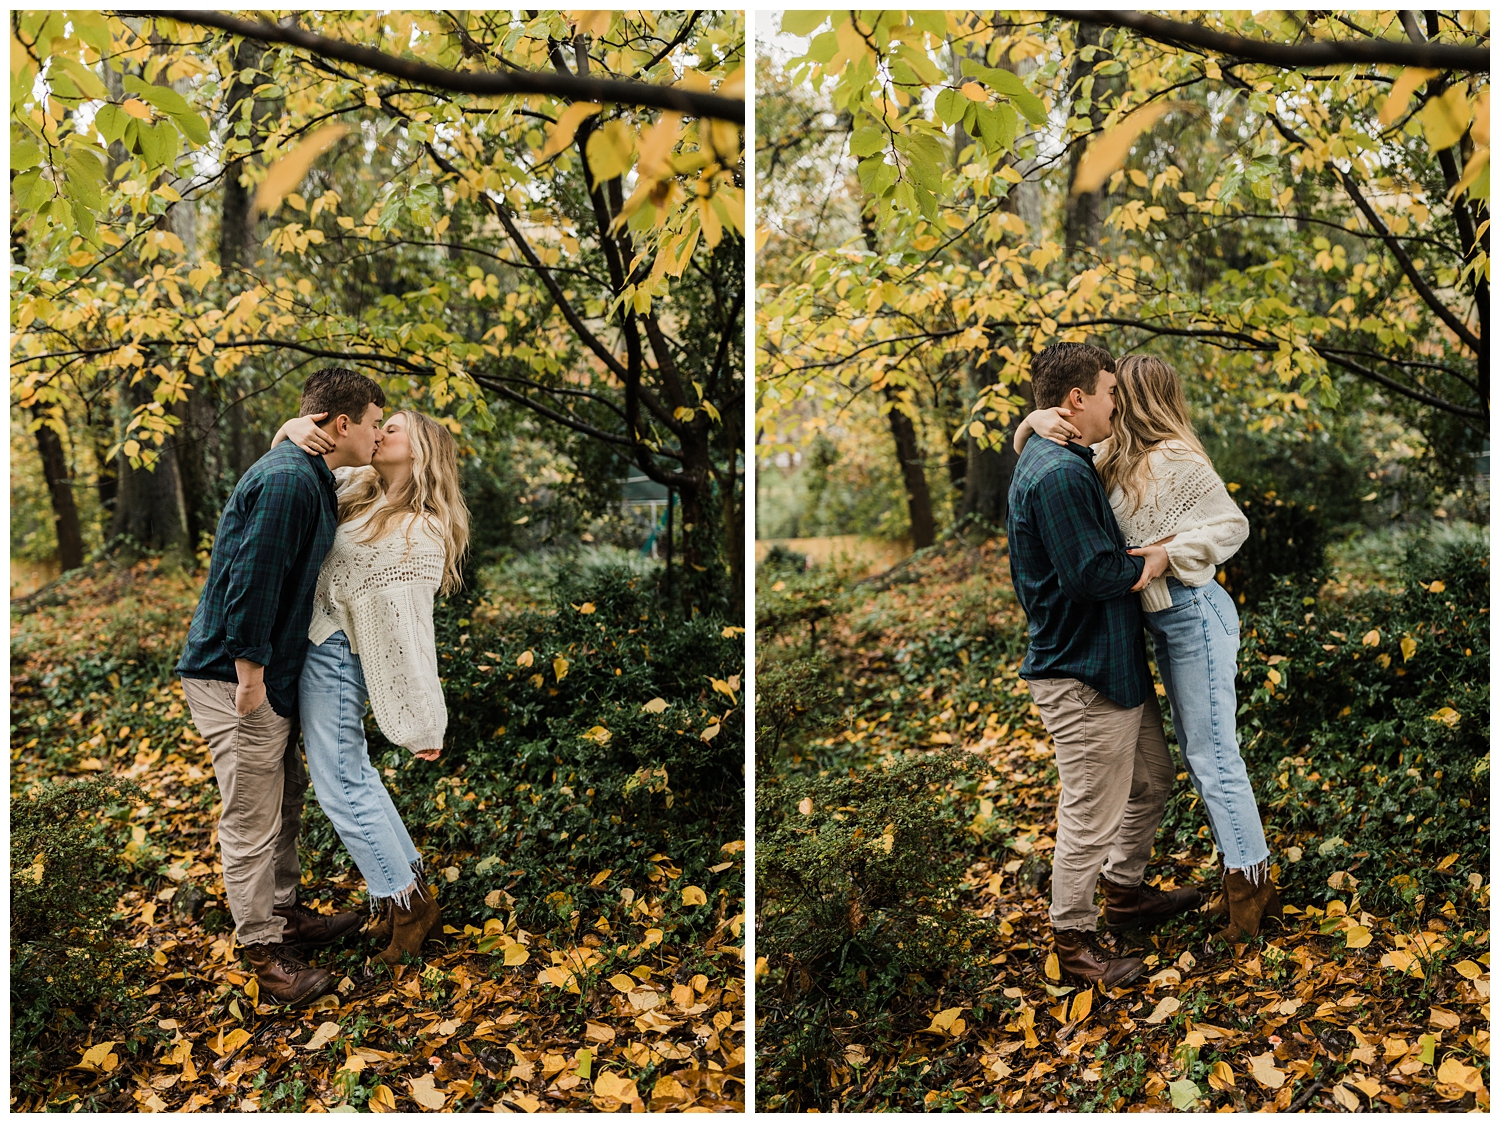 rainy day engagement session in marietta, georgia with cute couple walking and playing under a colorful yellow tree